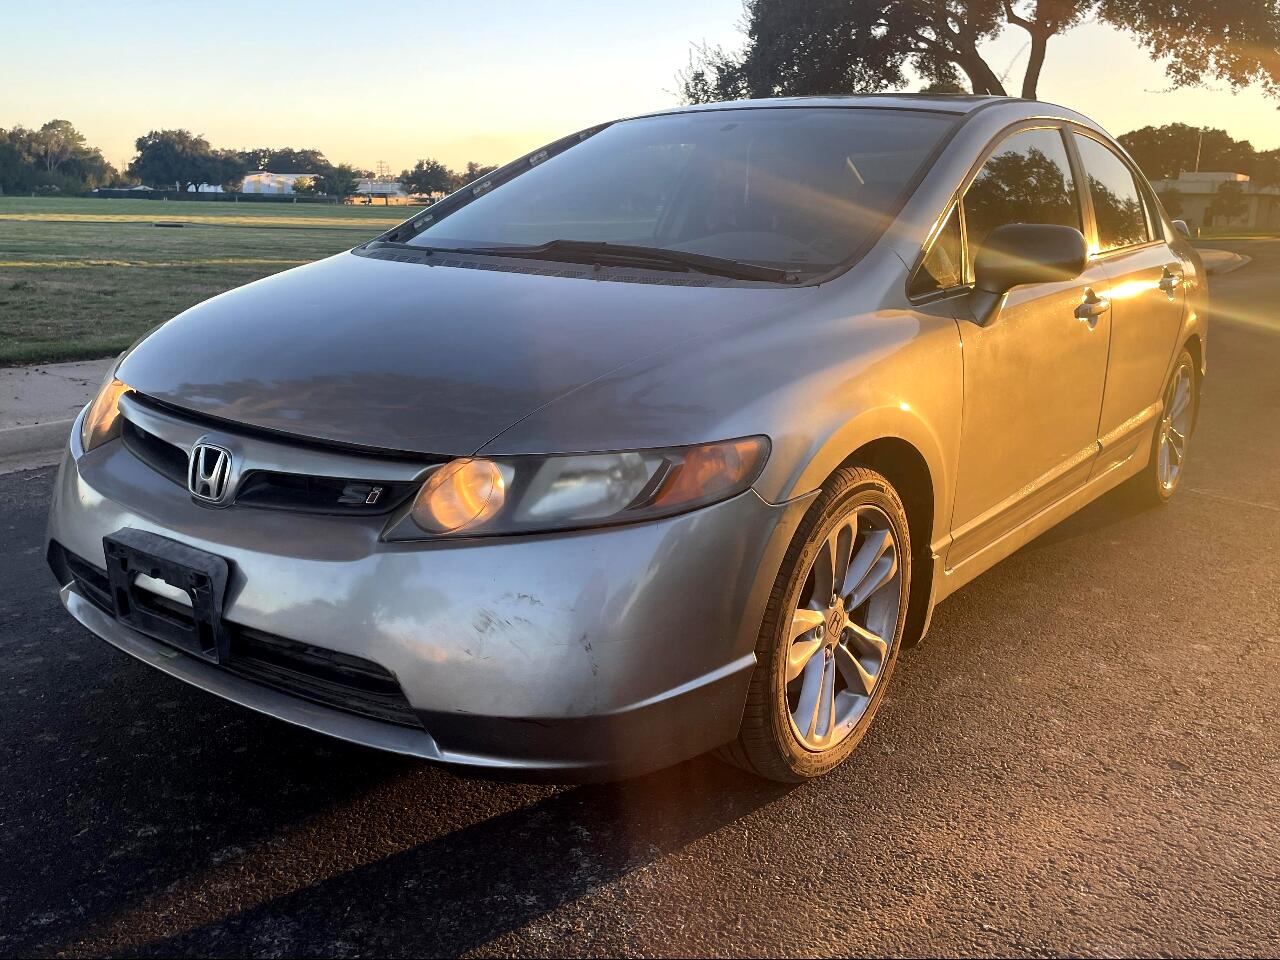 2007 Honda Civic Si 6-Spd with Performance Tires